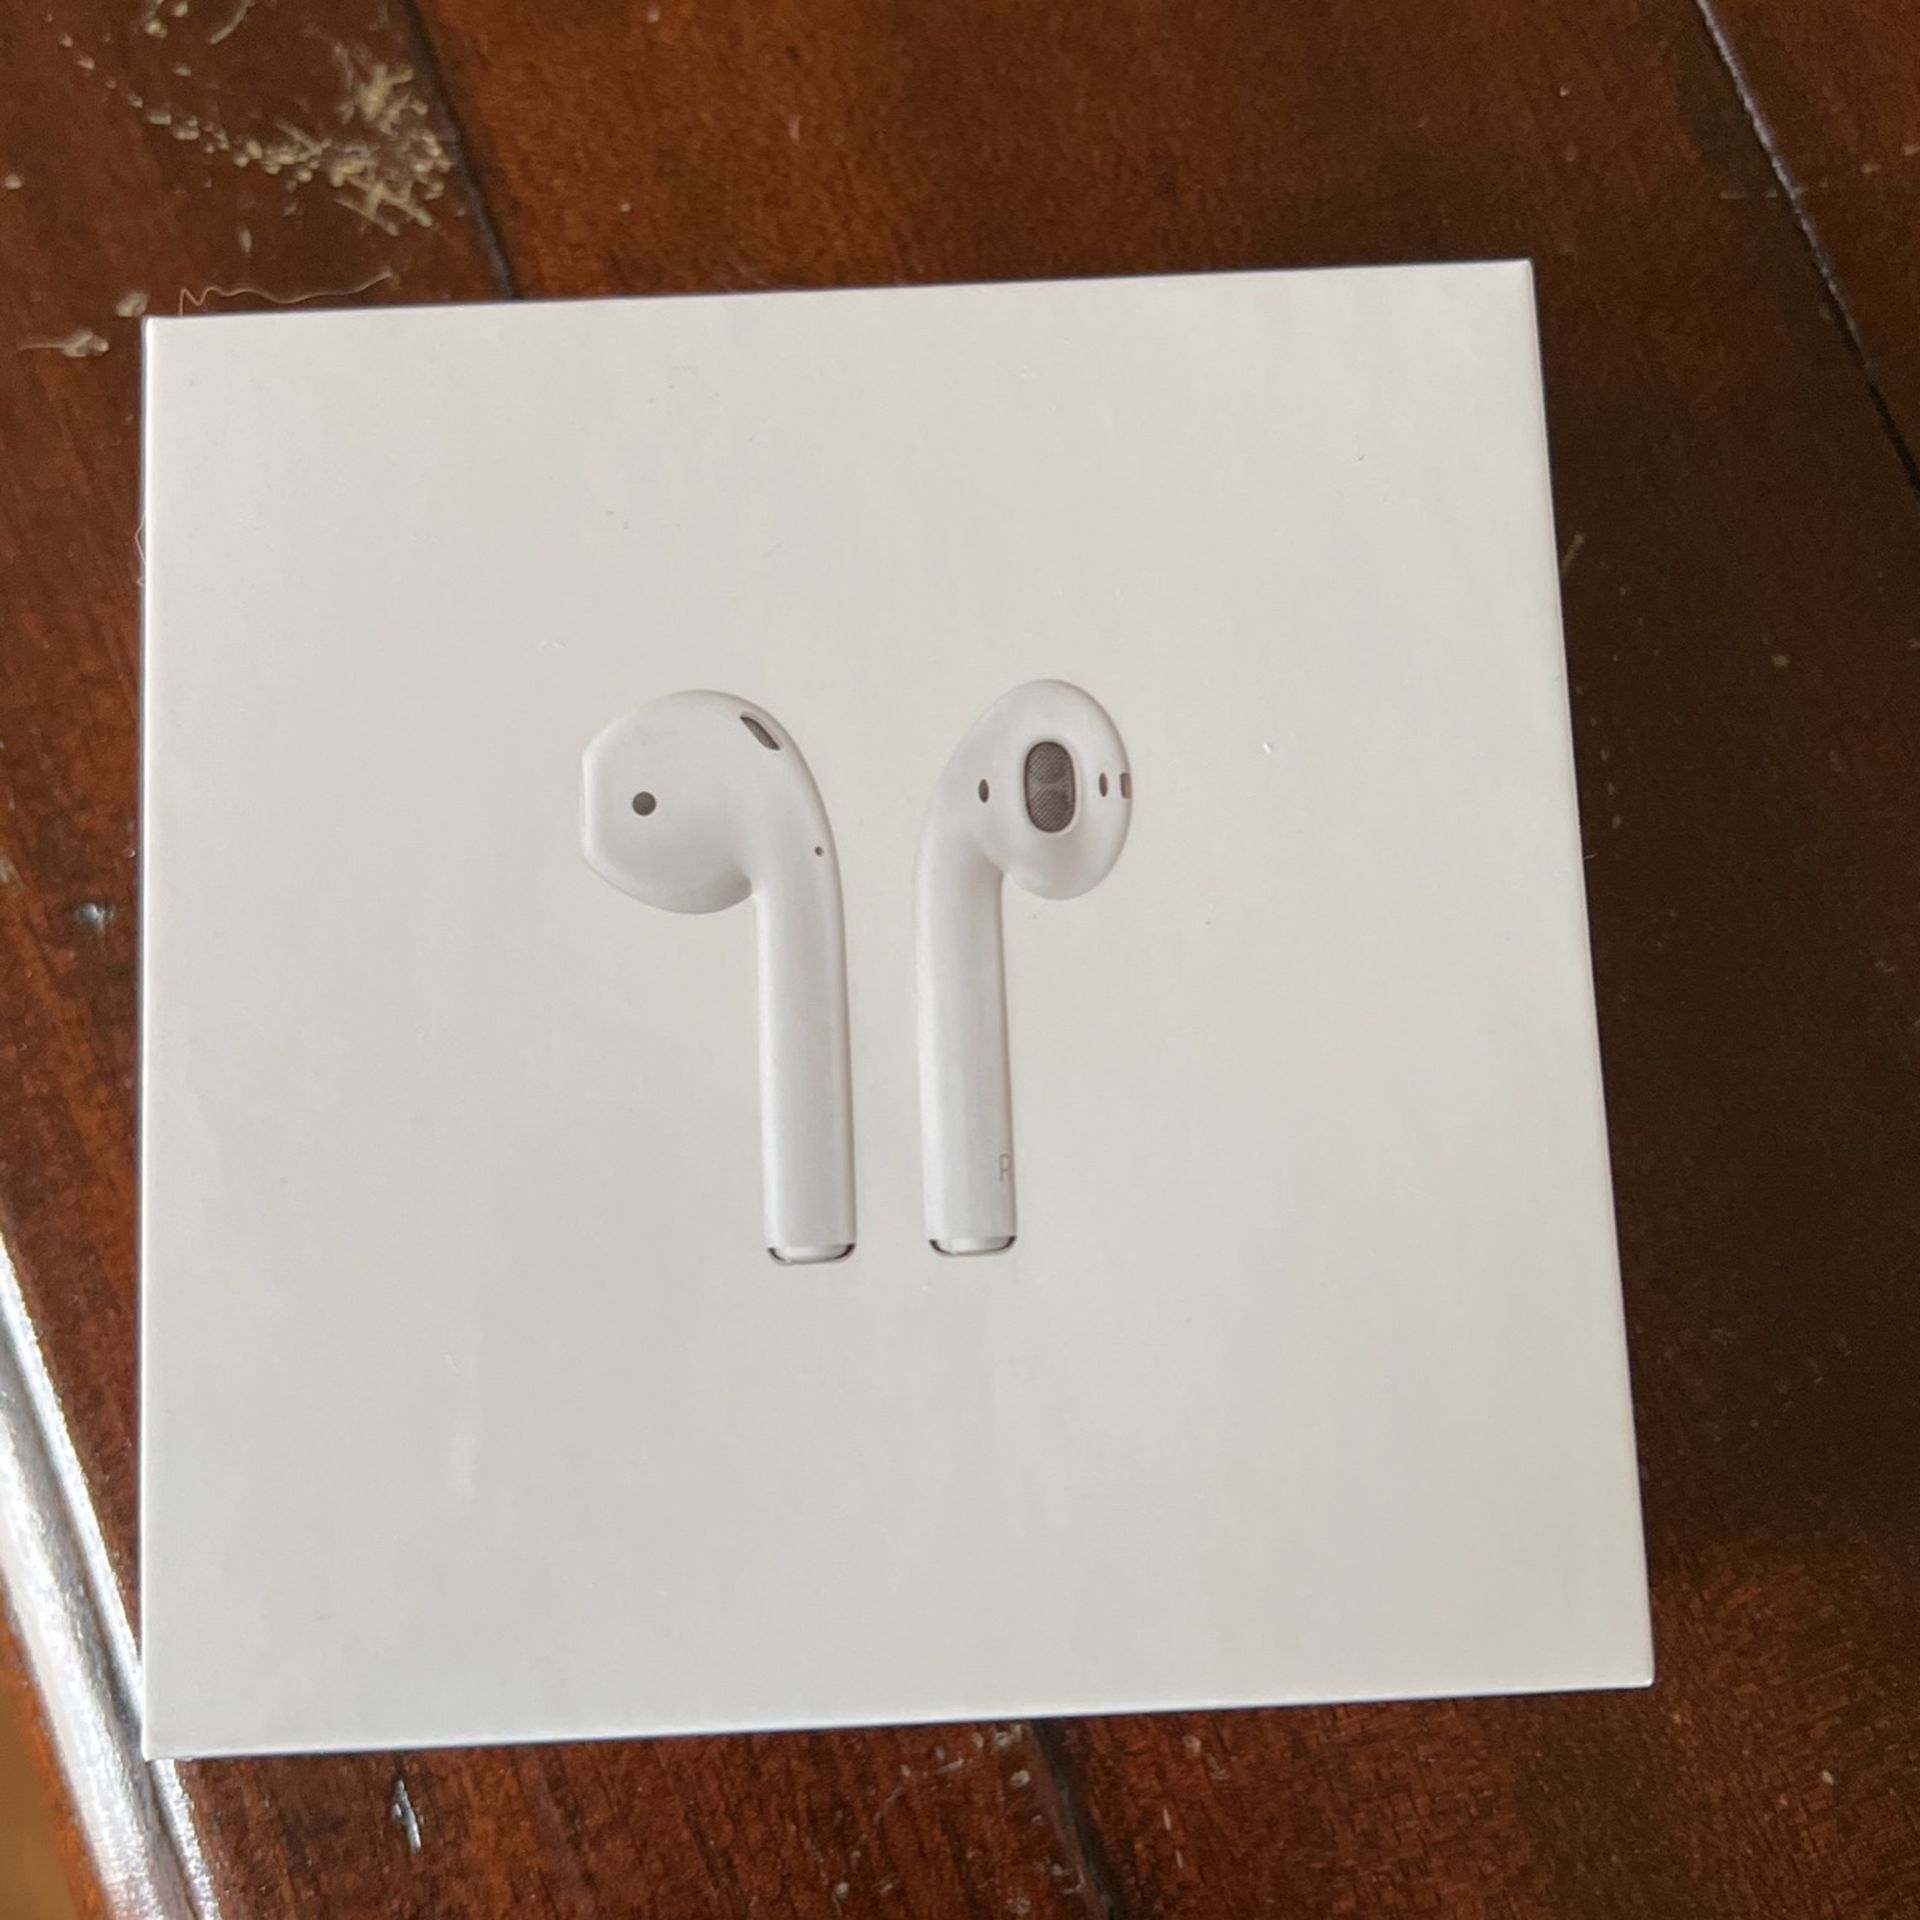 NEW Apple AirPods Gen 2 - Price FIRM 